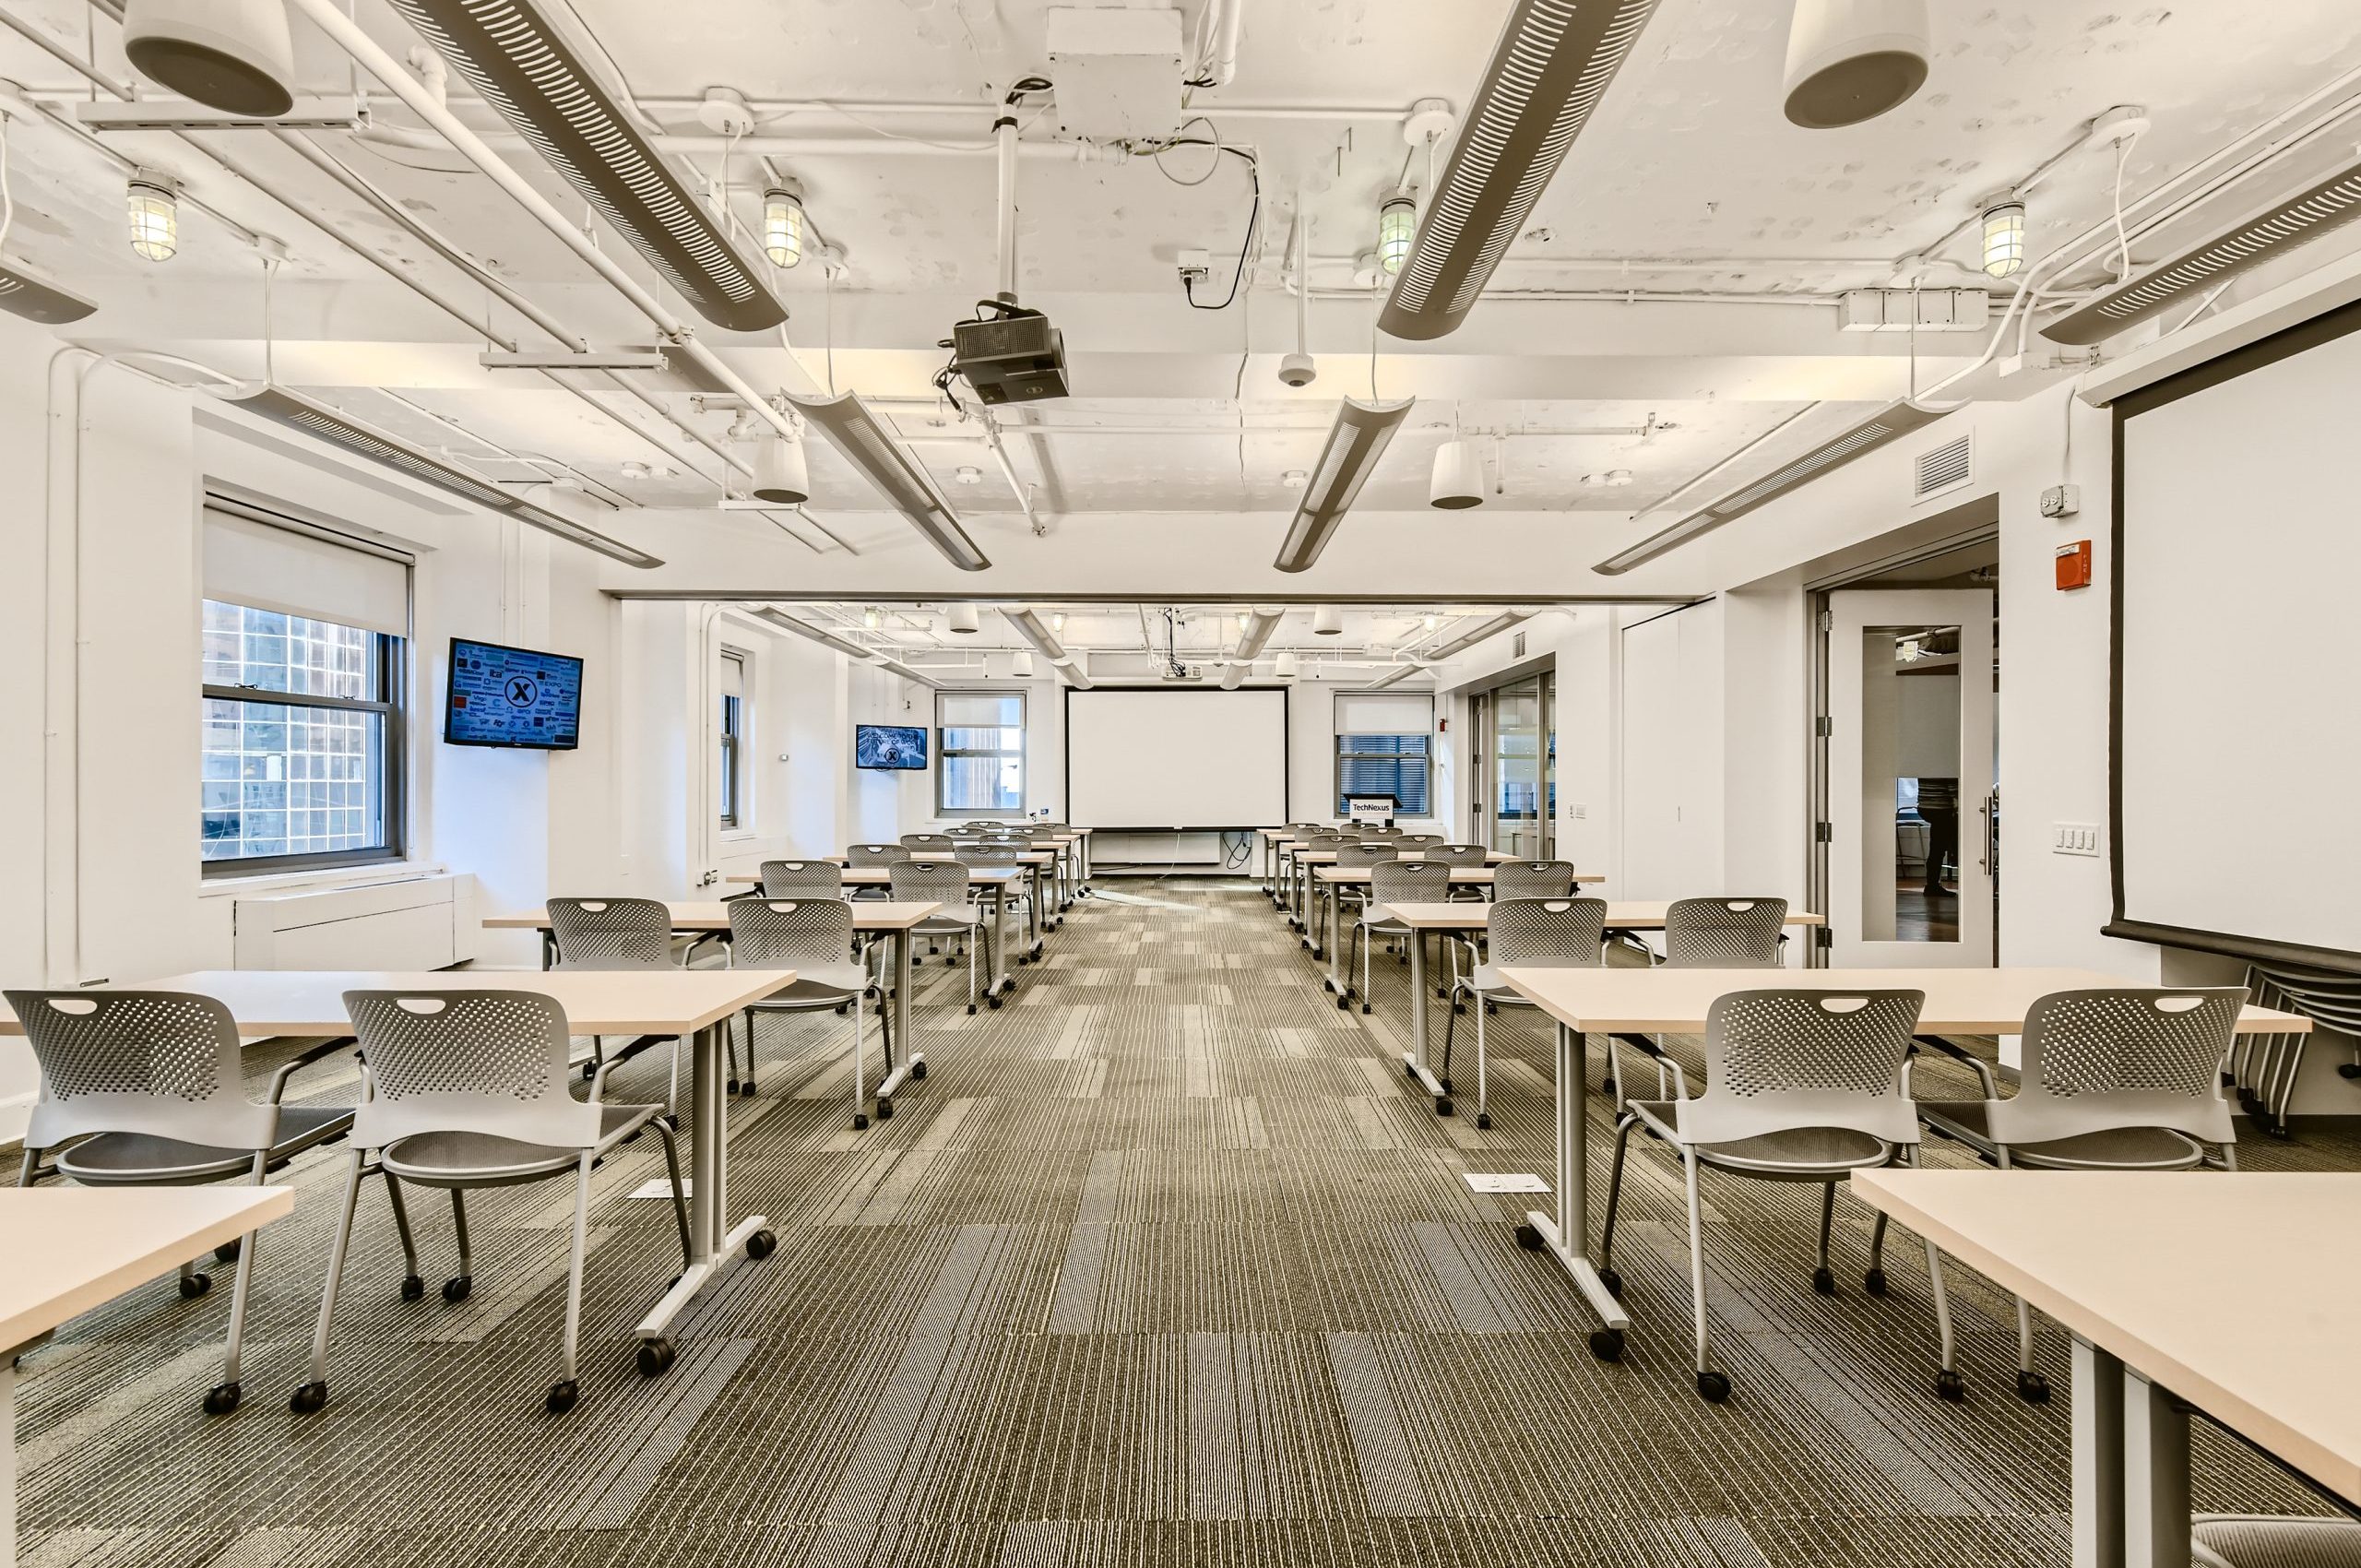 Conference Rooms C+D in the Classroom style